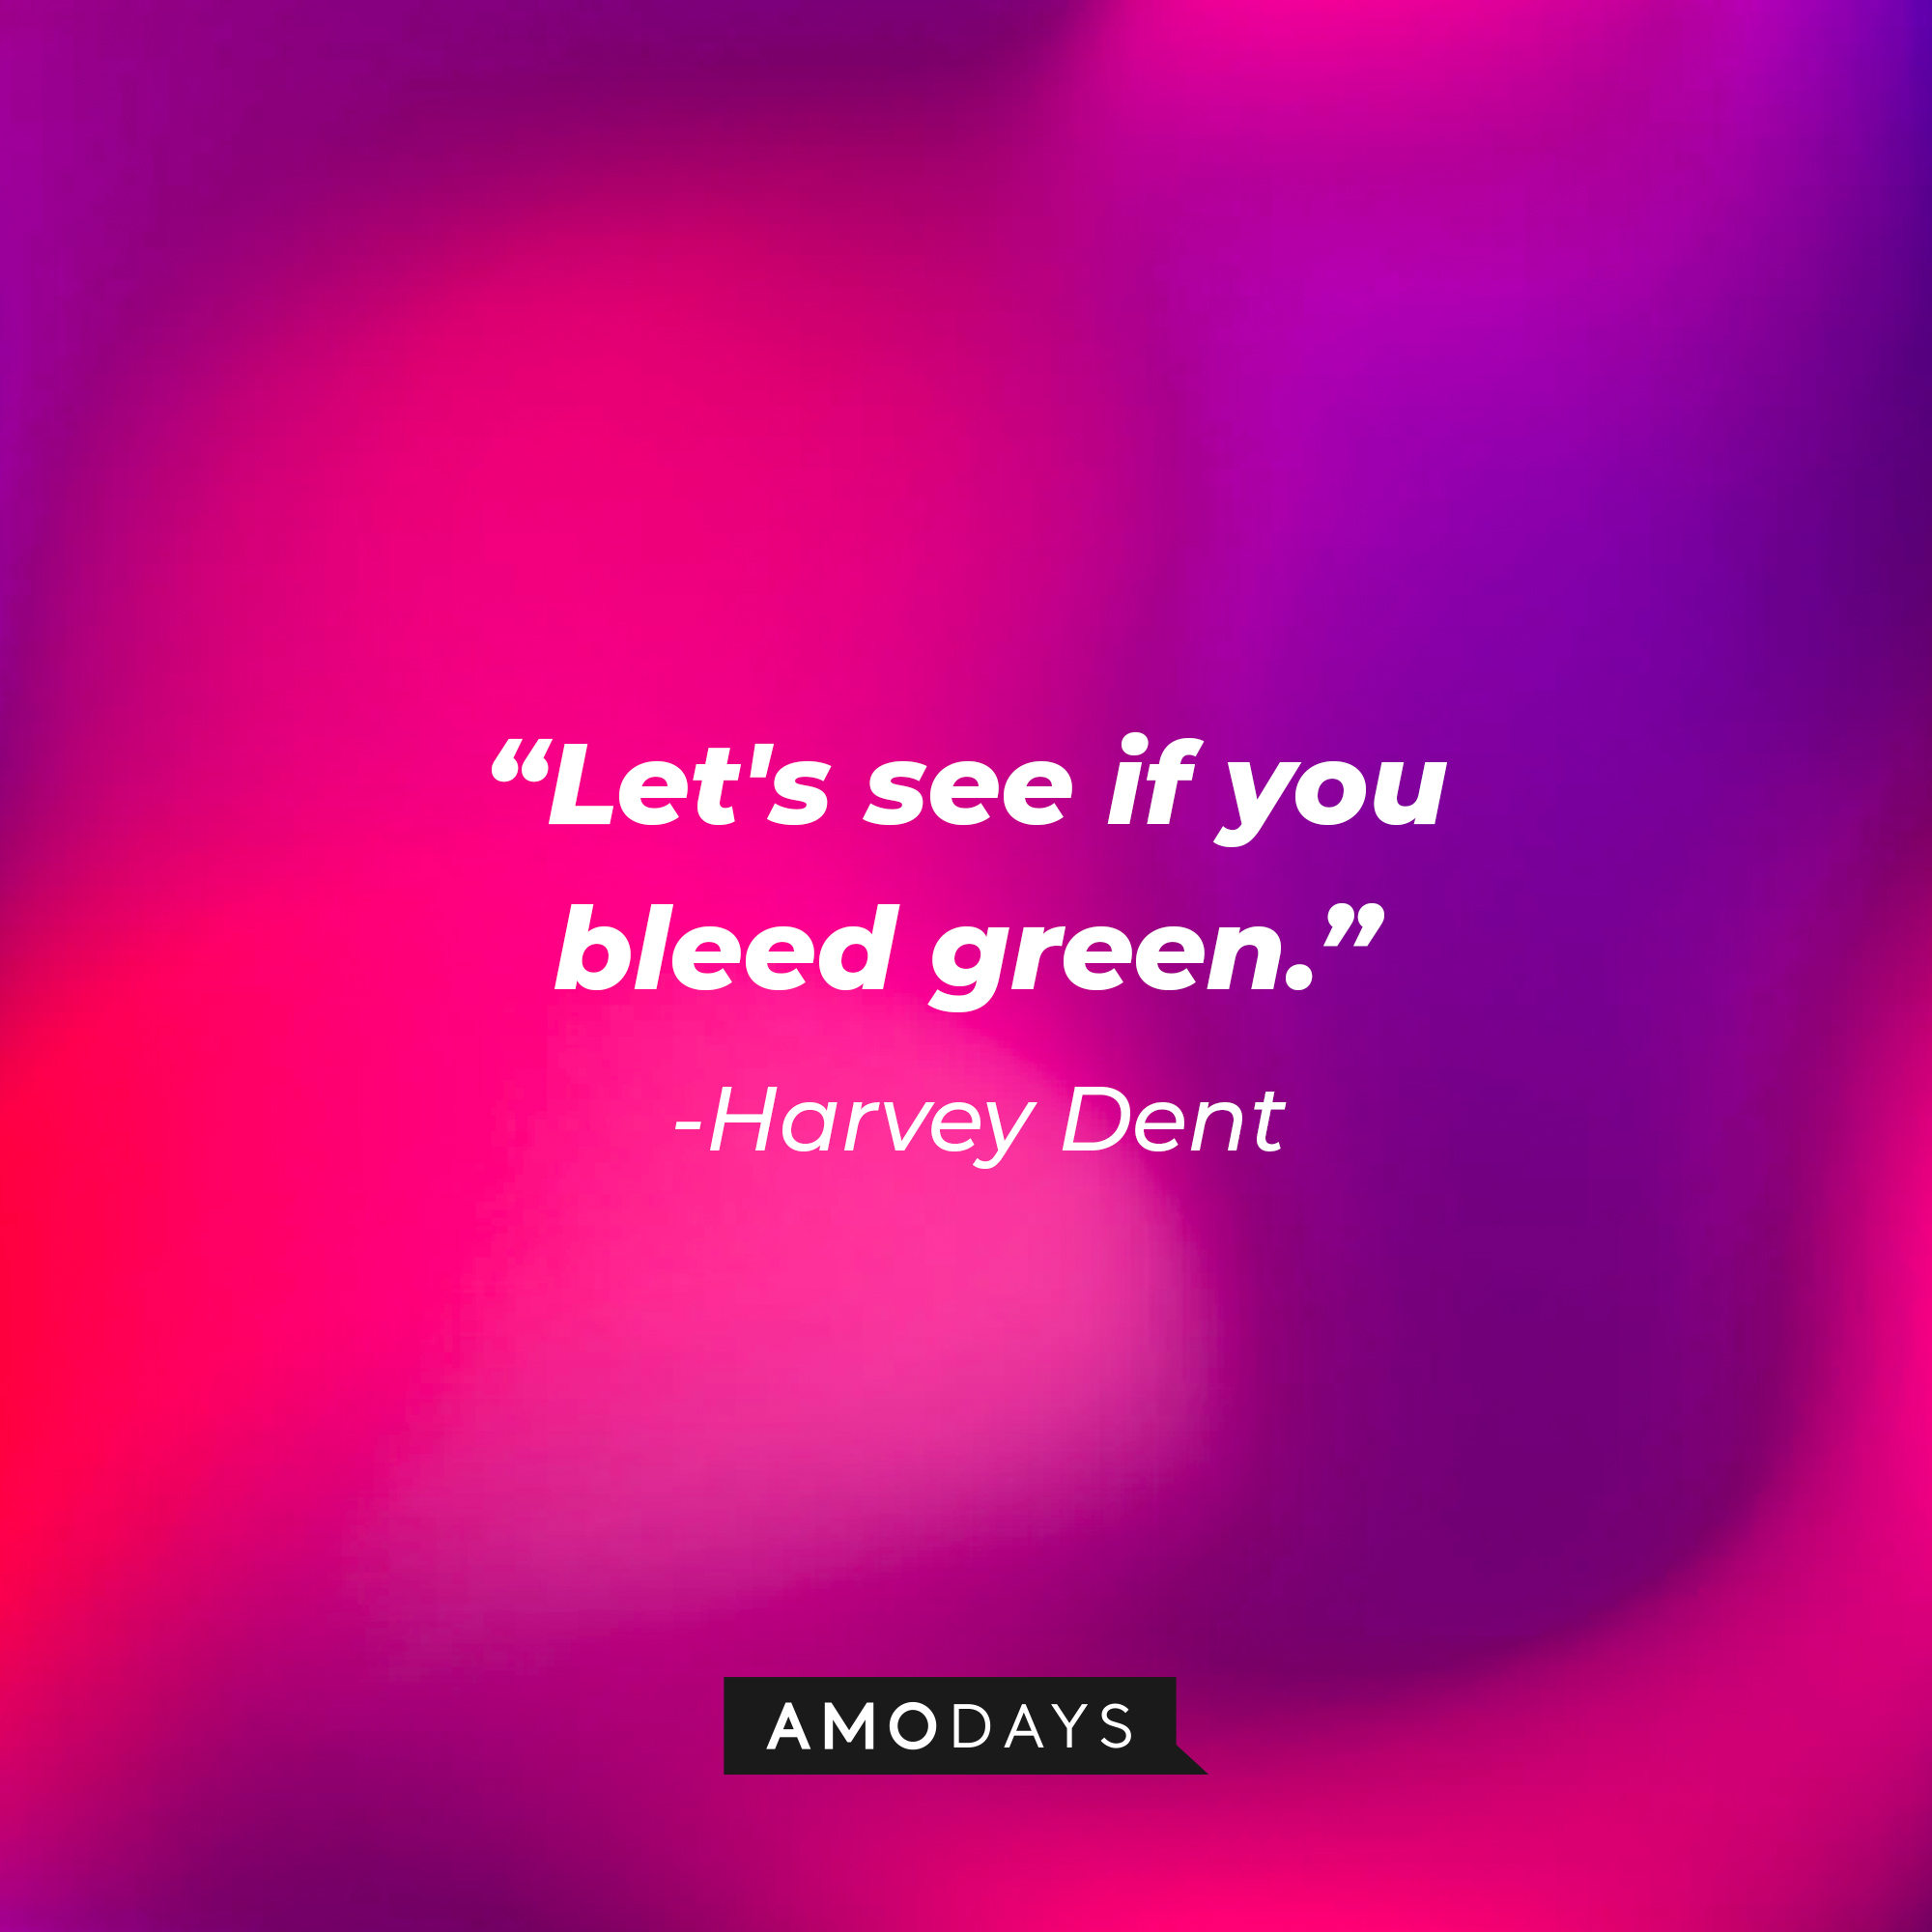 Harvey Dent's quote: “Let's see if you bleed green.” | Source: Amodays